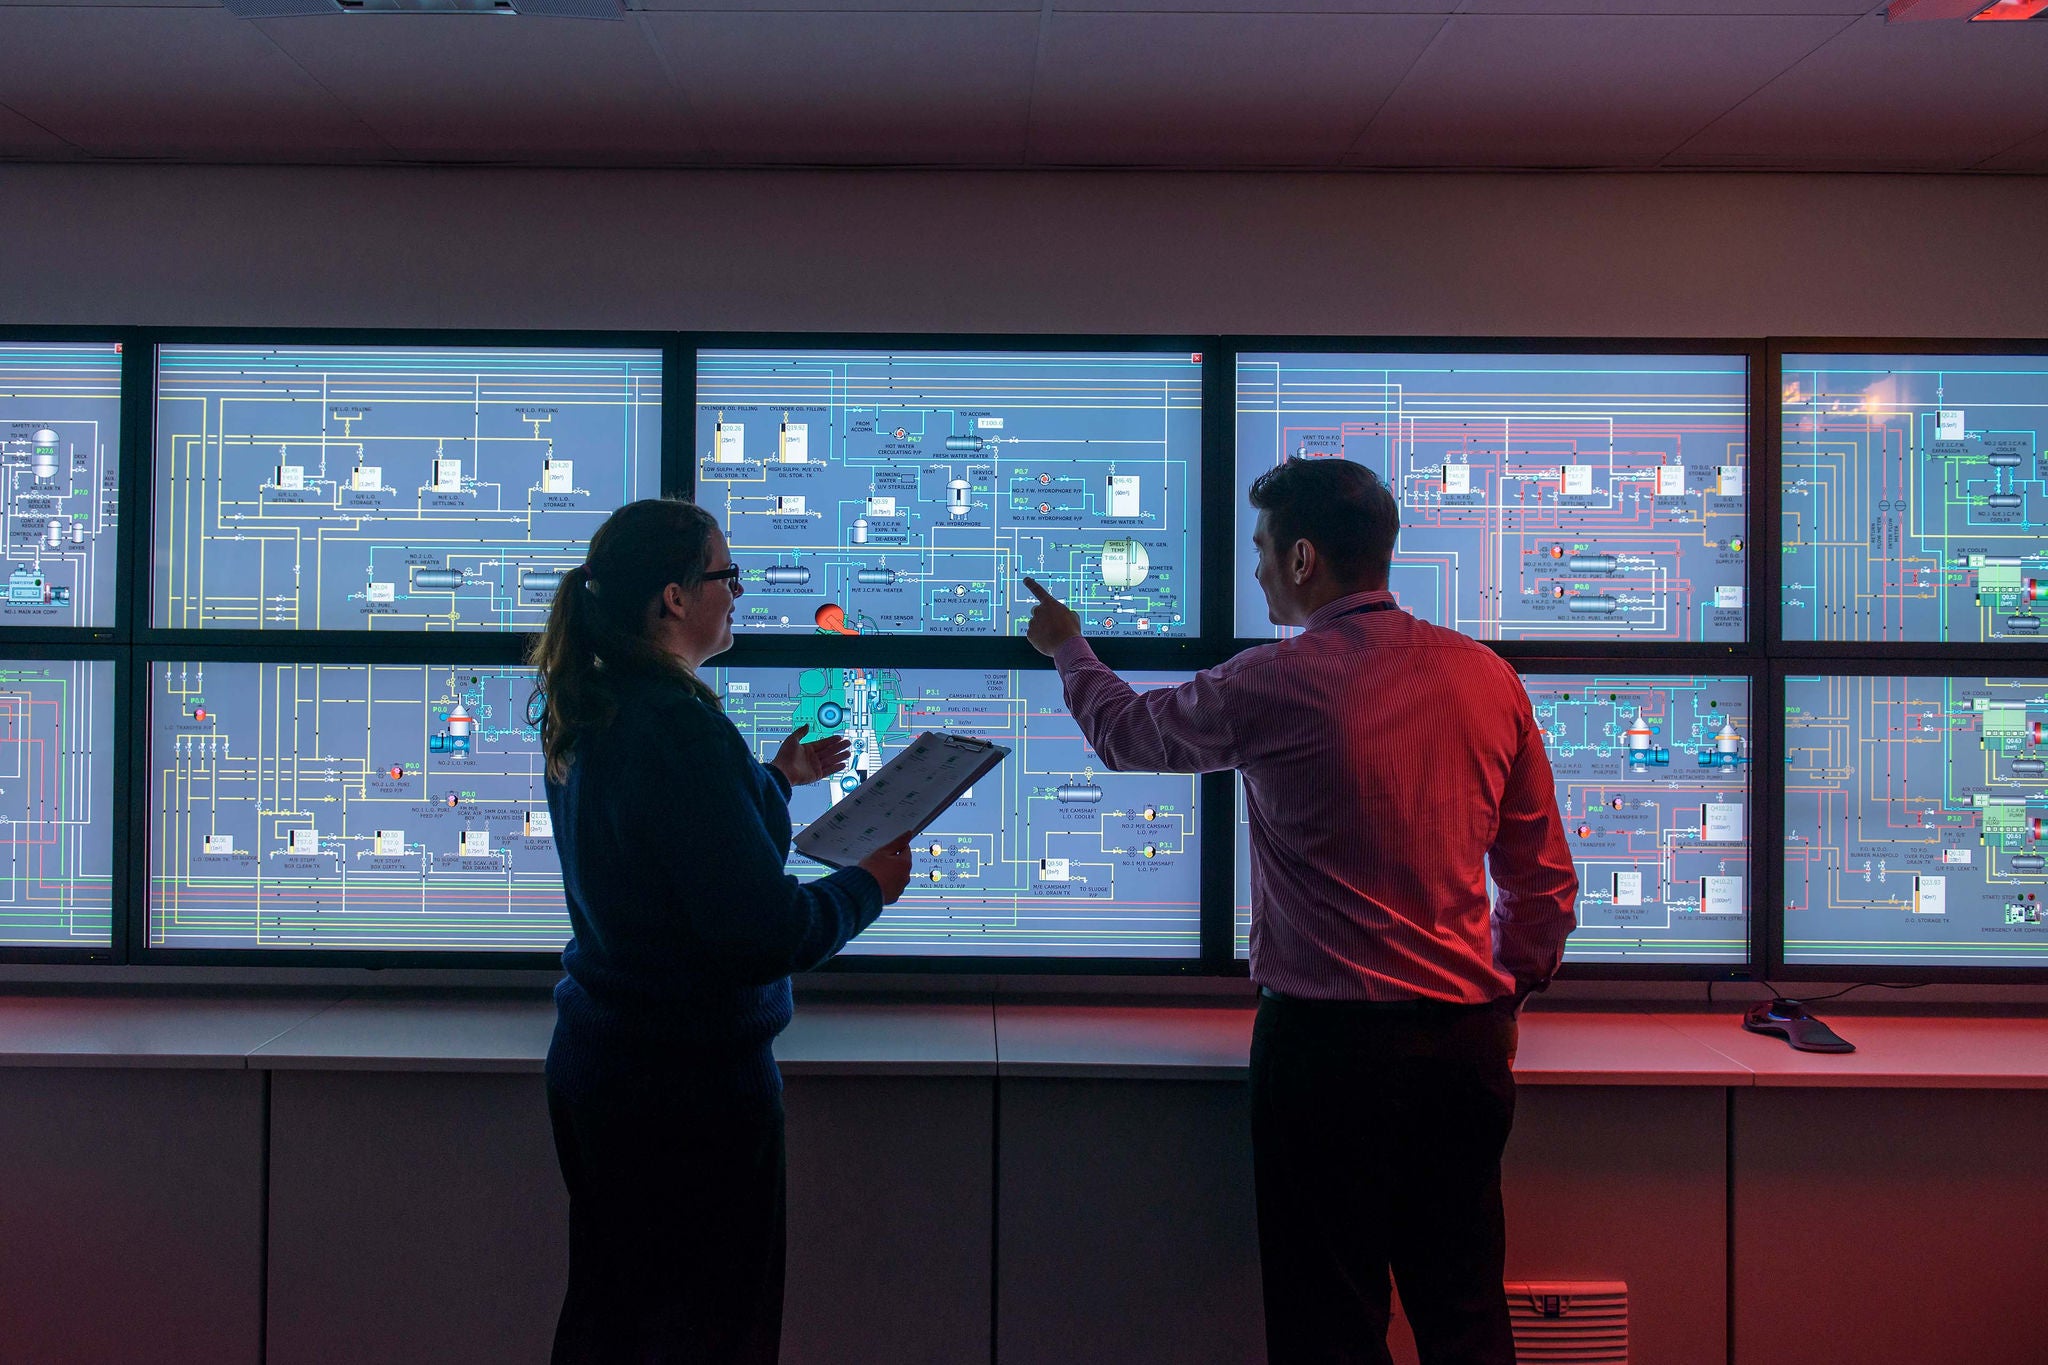 Engineers in front of system monitors on wall background